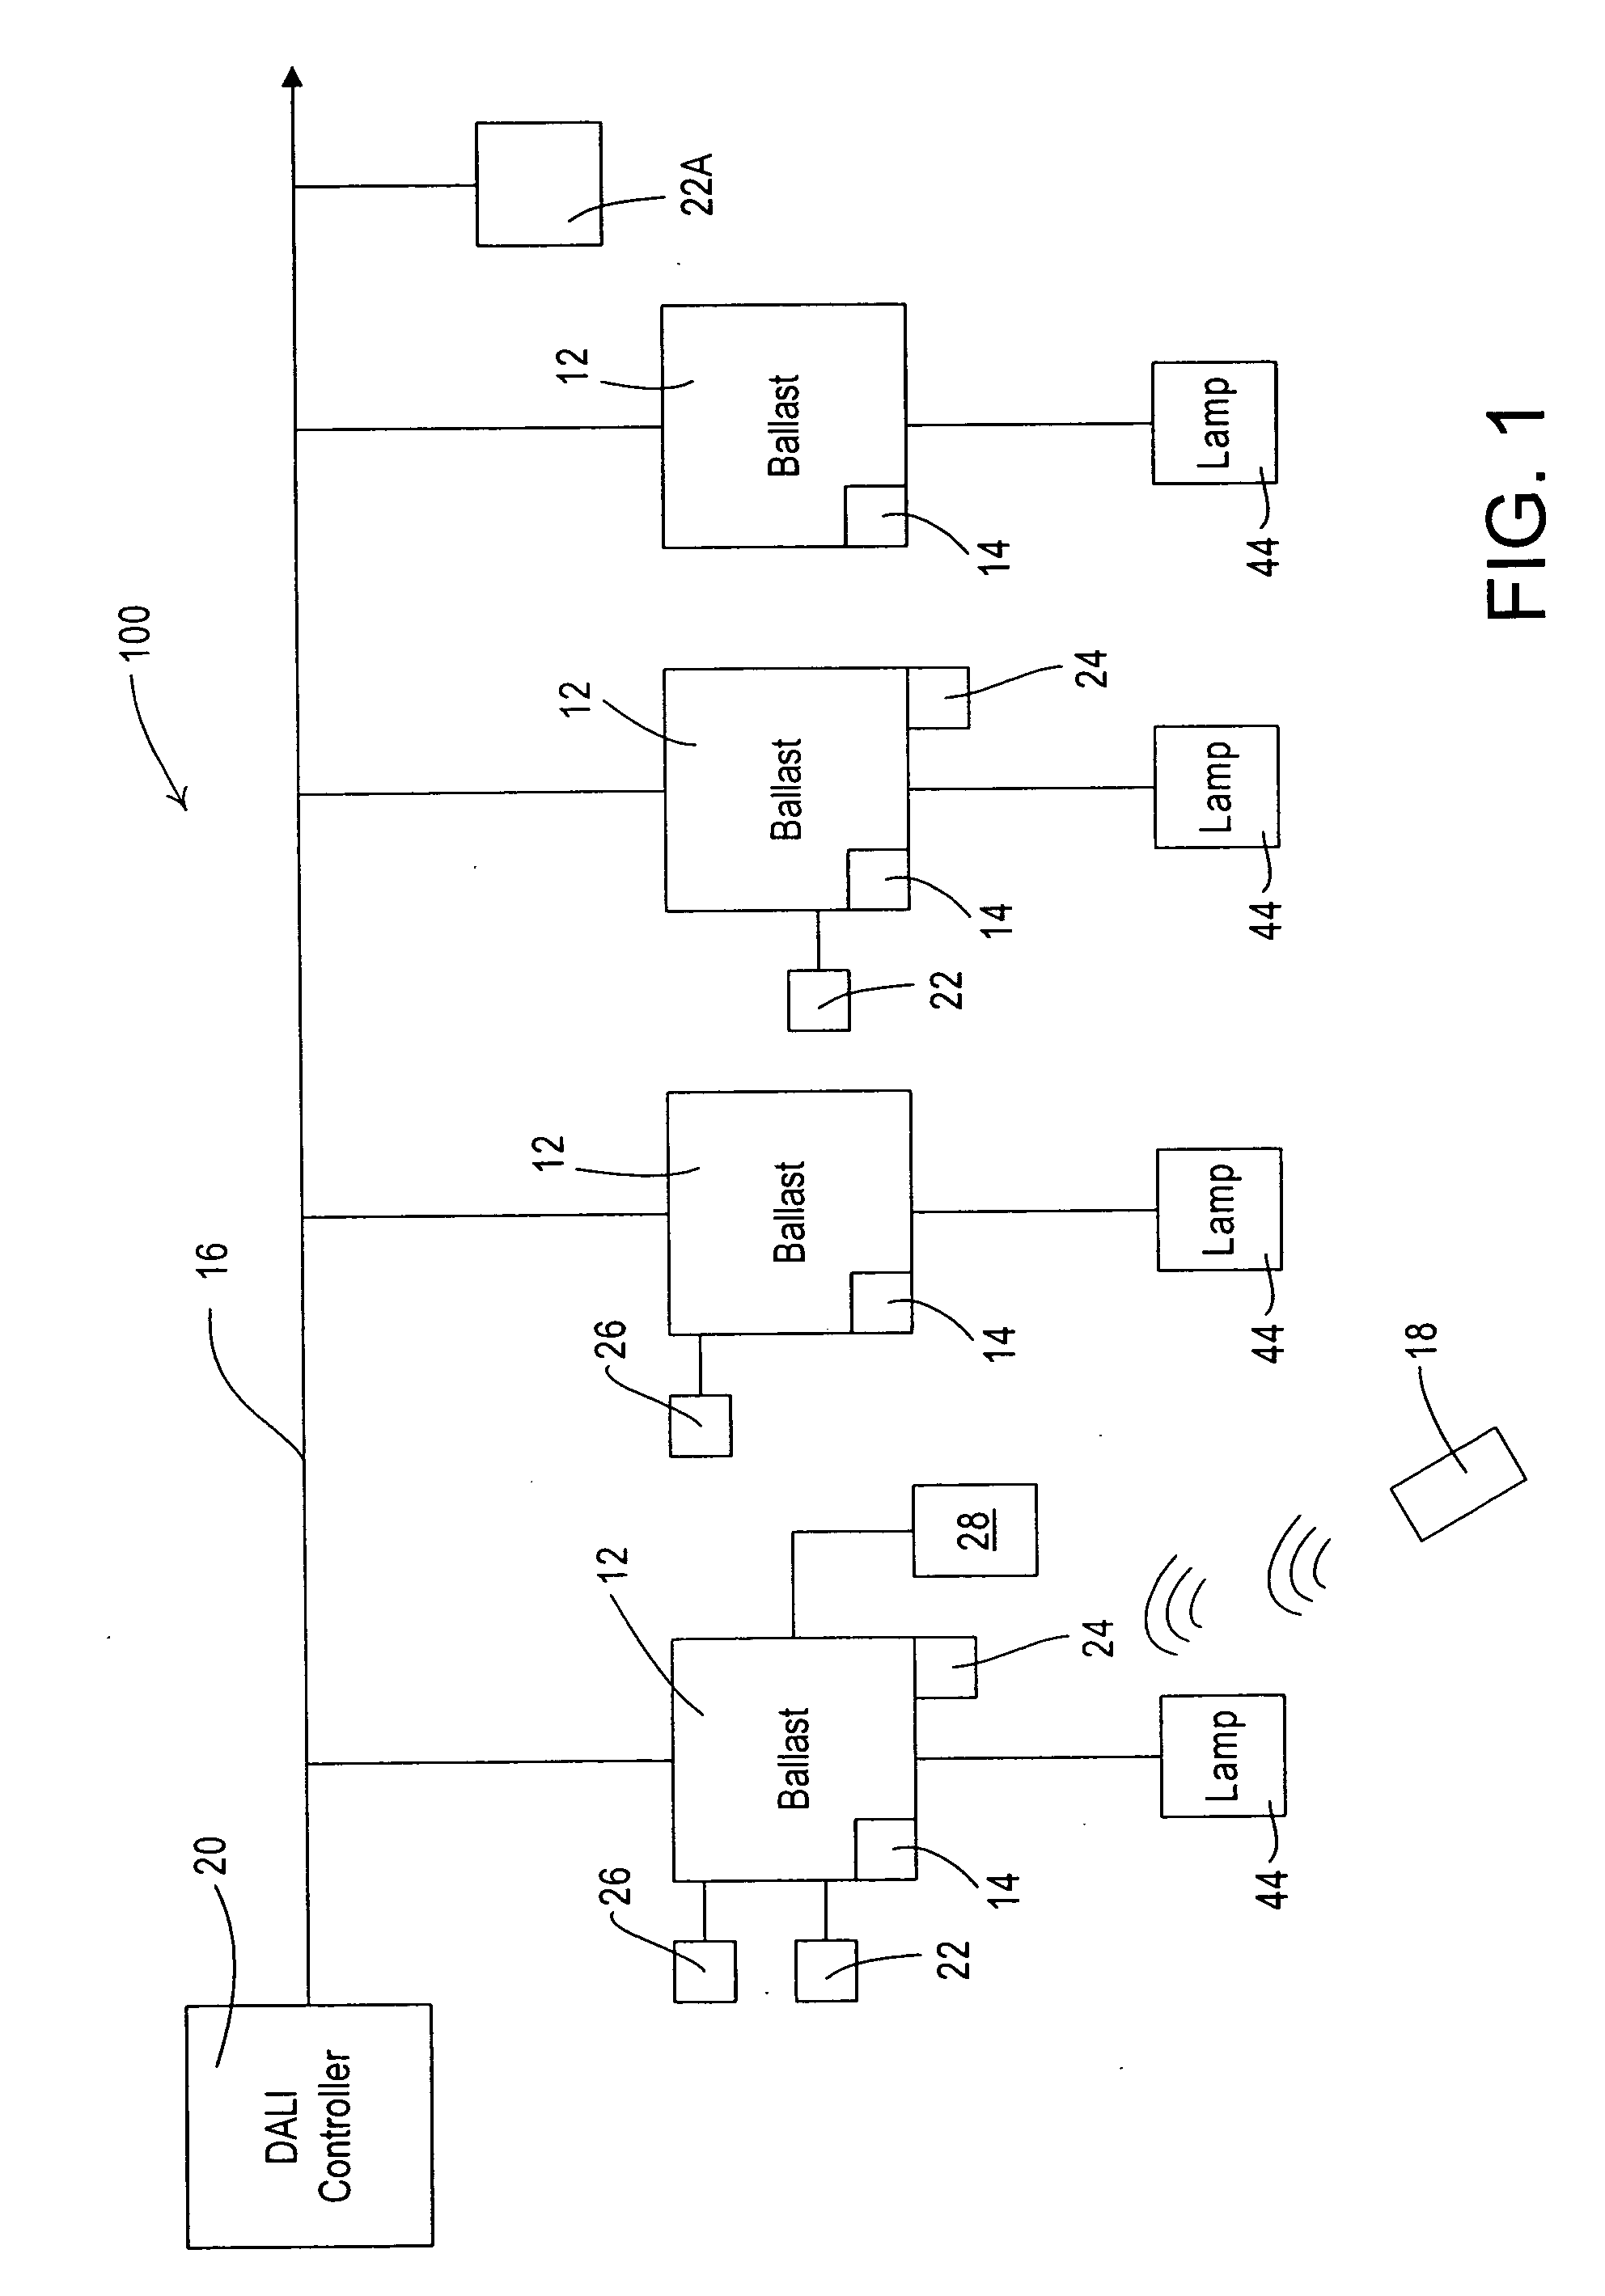 Distributed intelligence ballast system and extended lighting control protocol